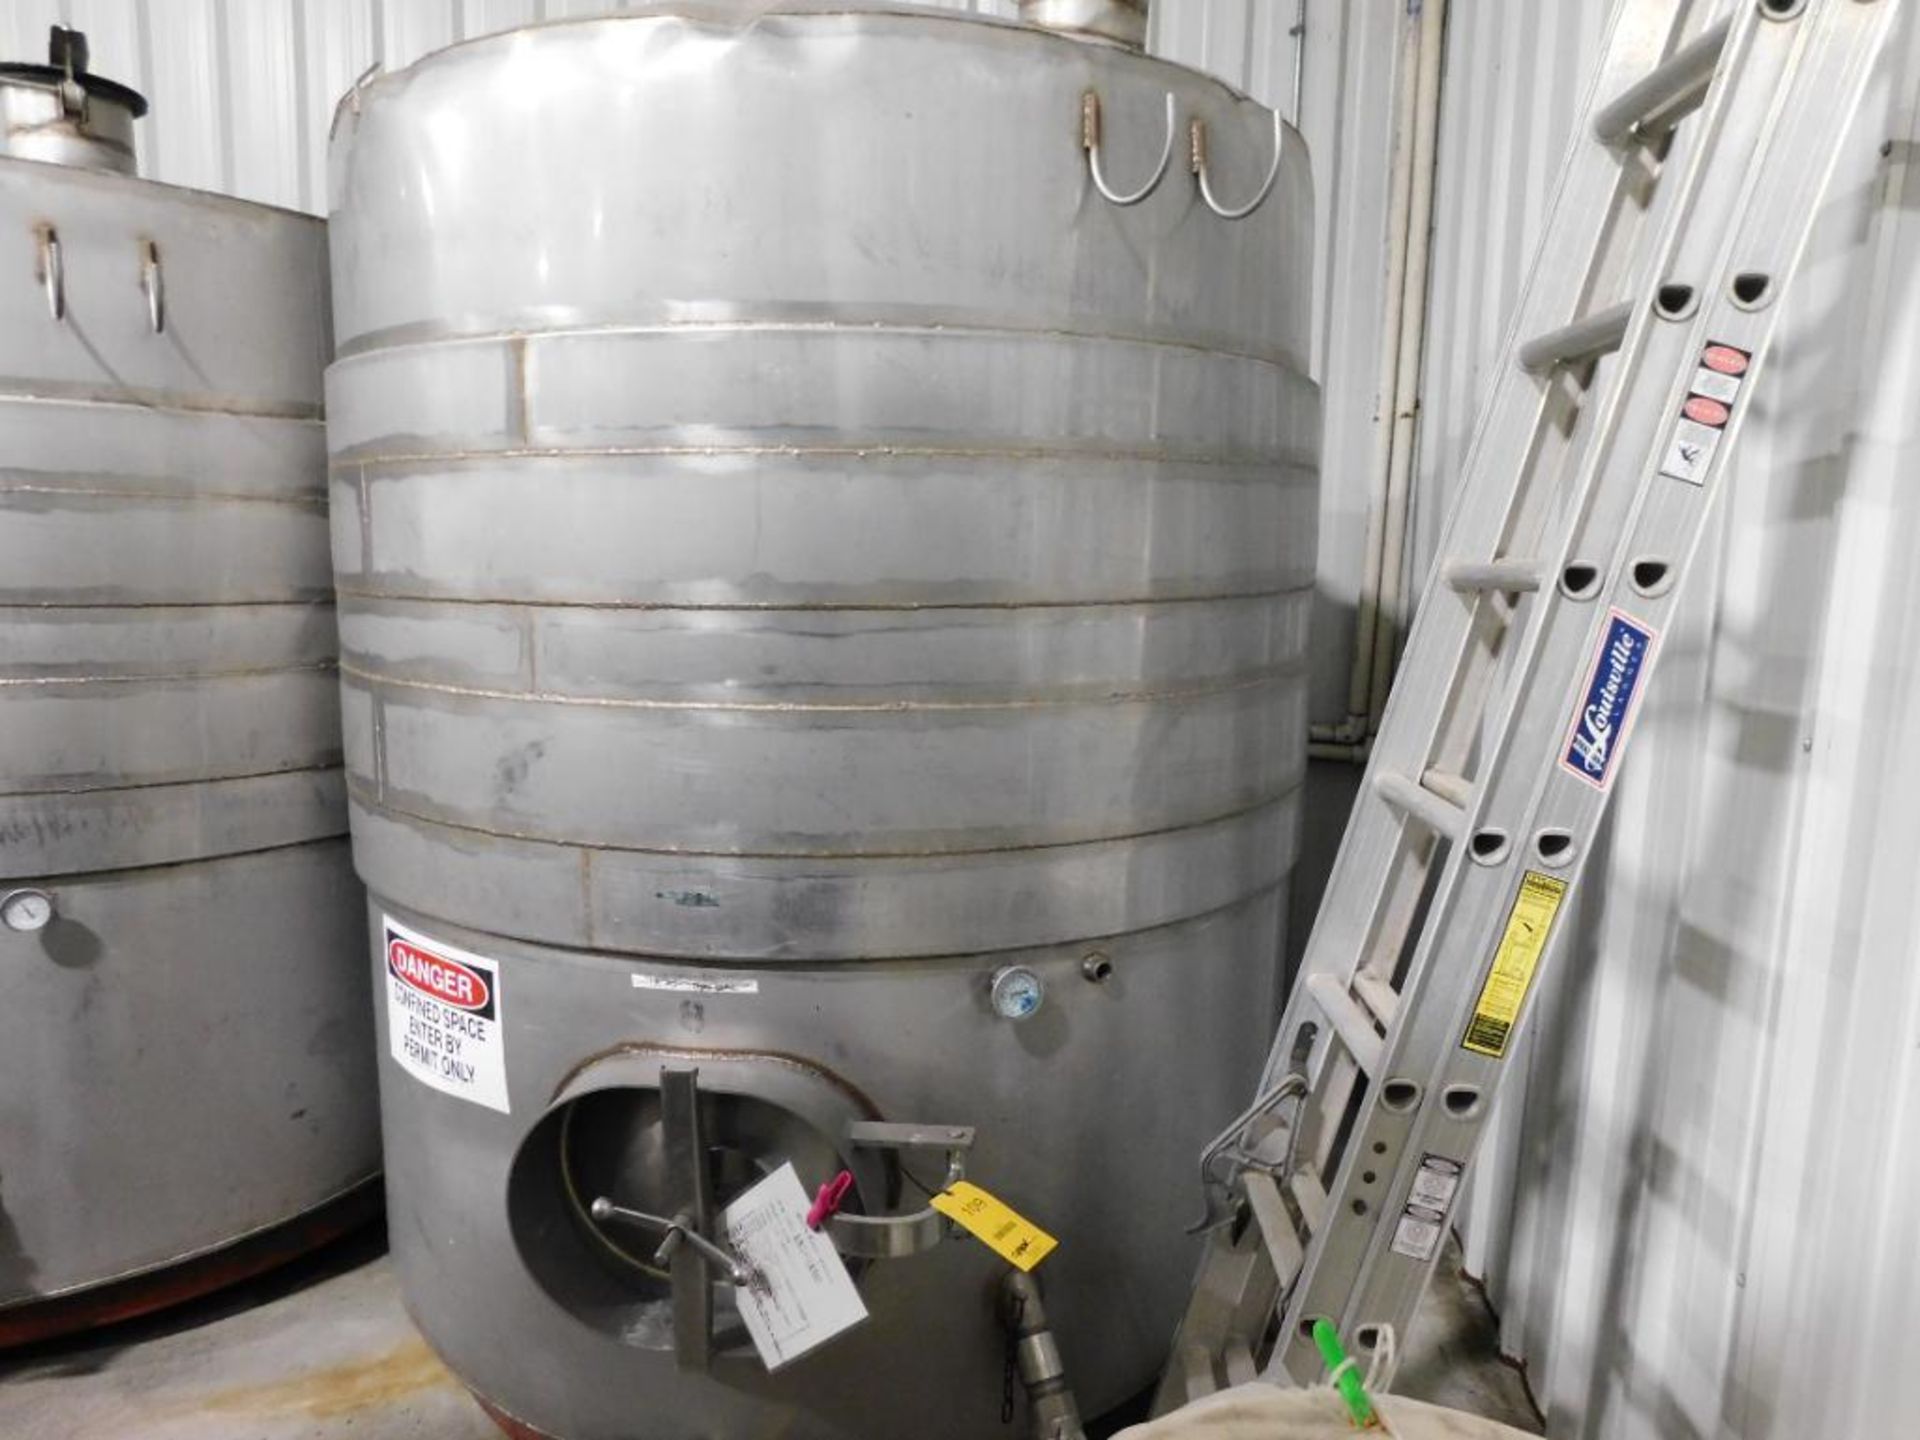 1,600 Gallon Stainless Steel Wine Storage Tank w/Glycol Jacket (LOCATED IN WINERY) - Image 2 of 3